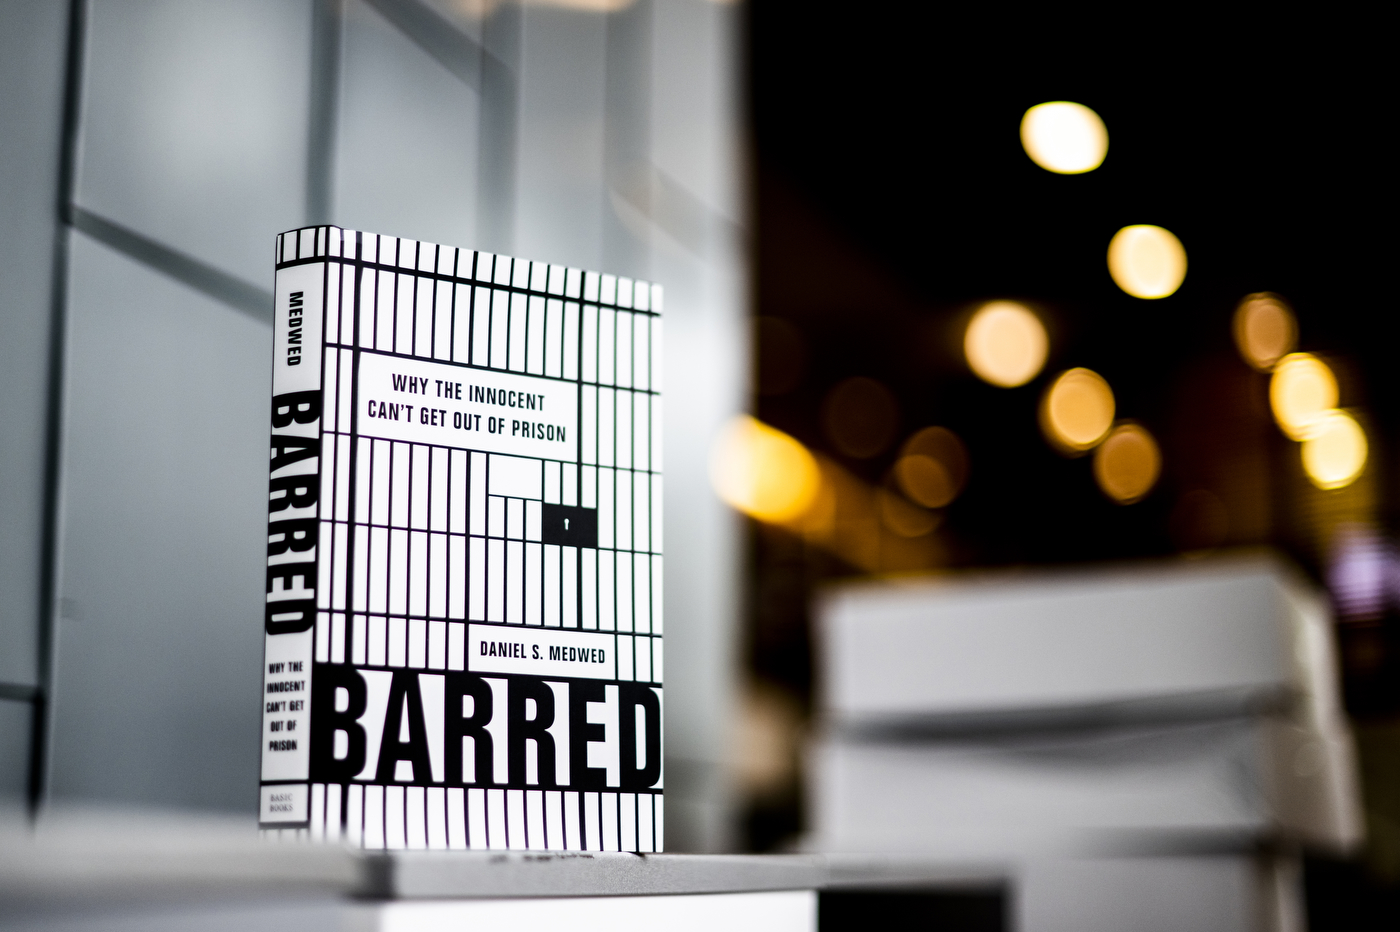 A book titled 'Barred: Why the Innocent Can't Get Out of Prison' is about how technicalities keep people in prison.